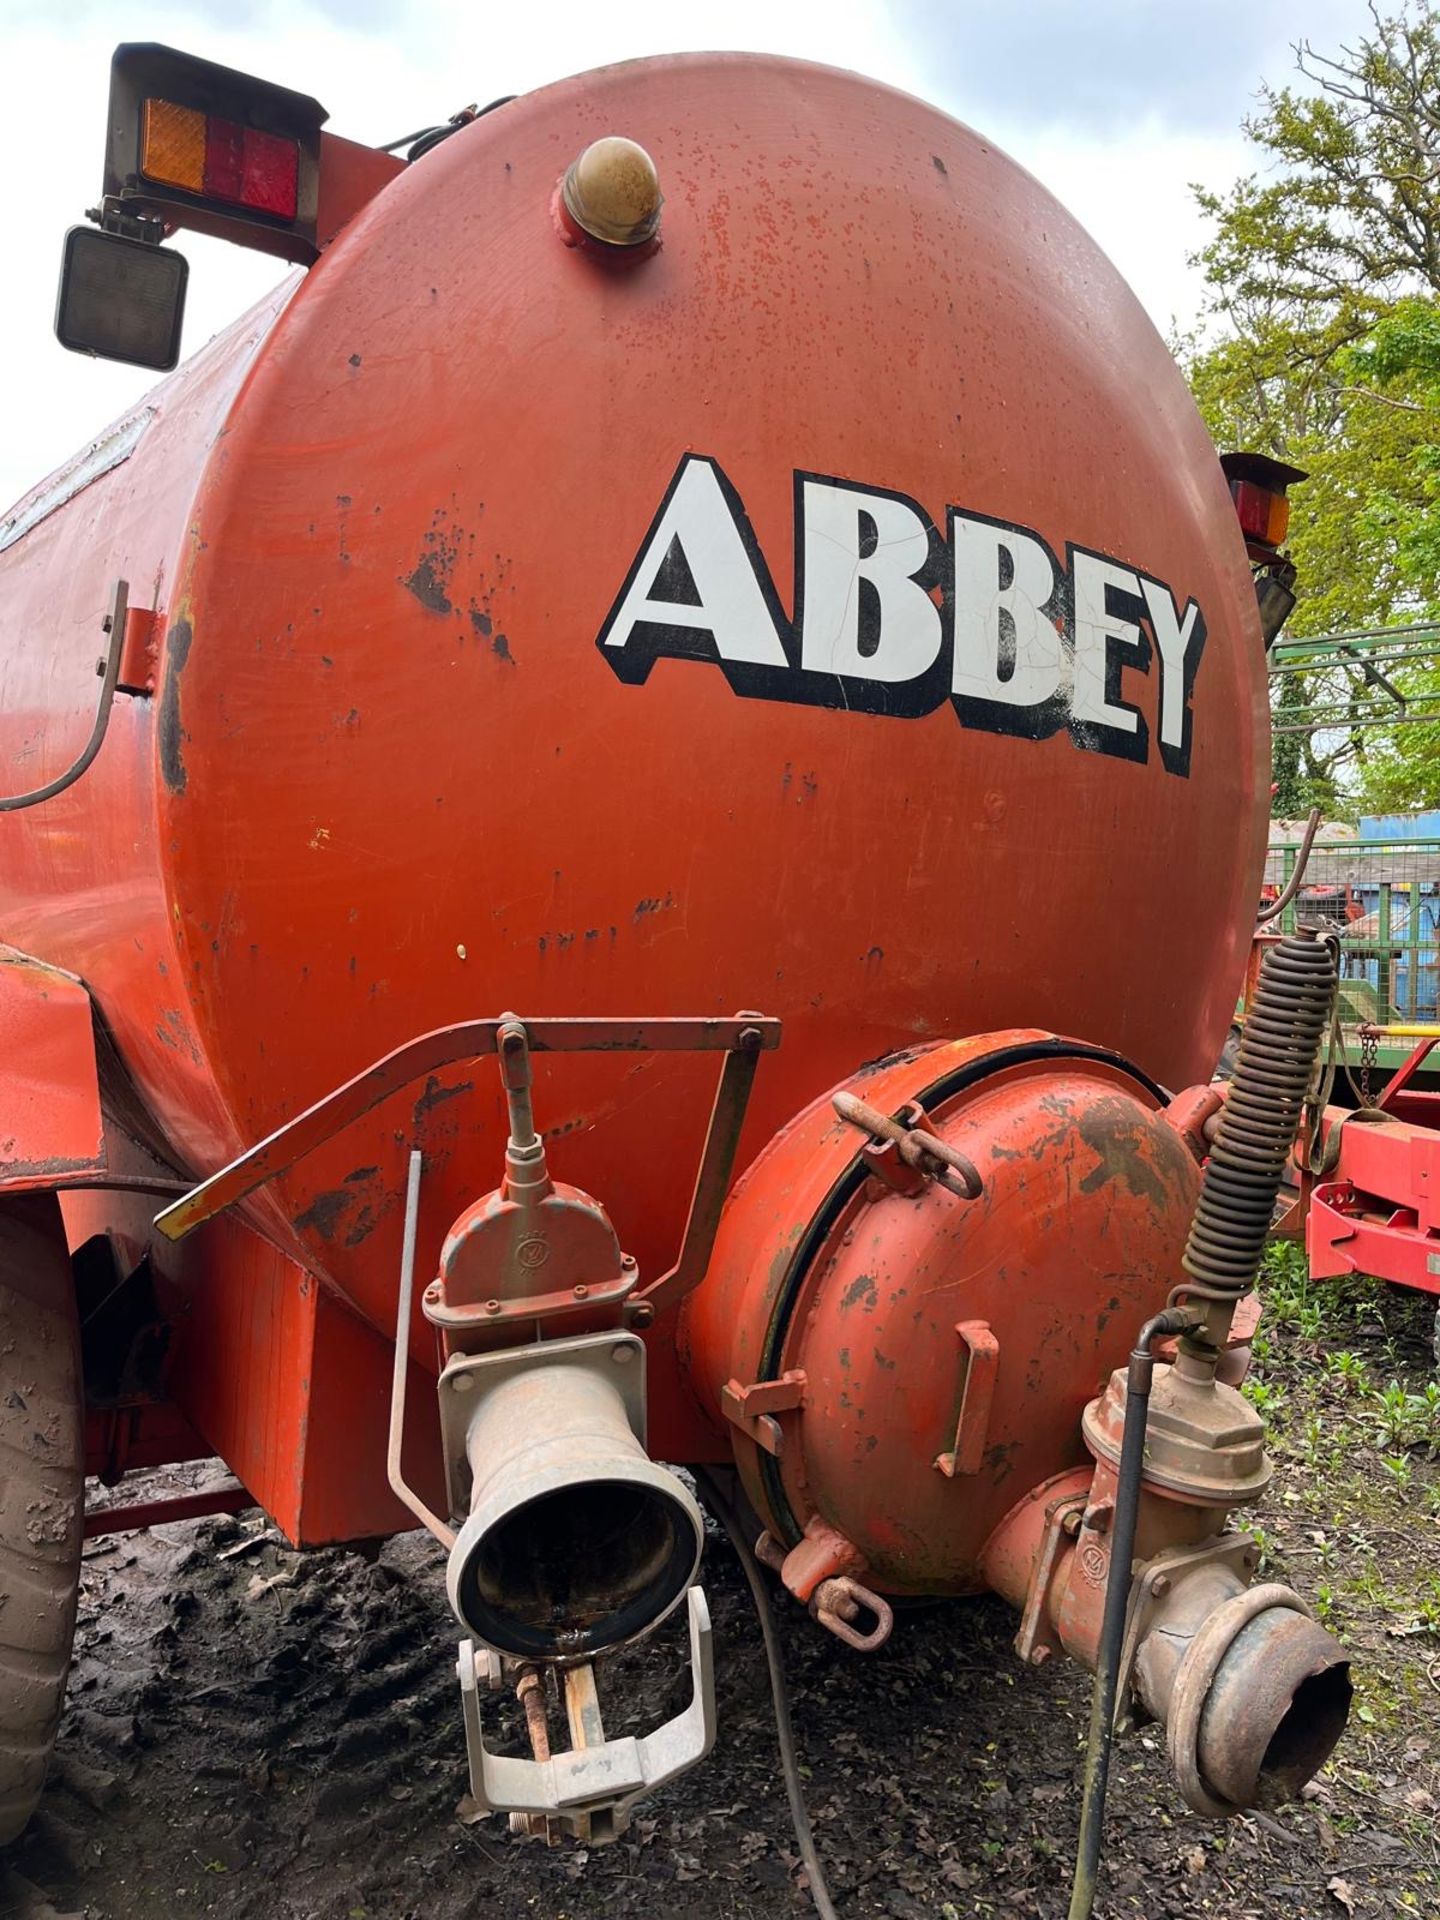 ABBEY 2000 GALLONS SLURRY TANKER - Image 2 of 8